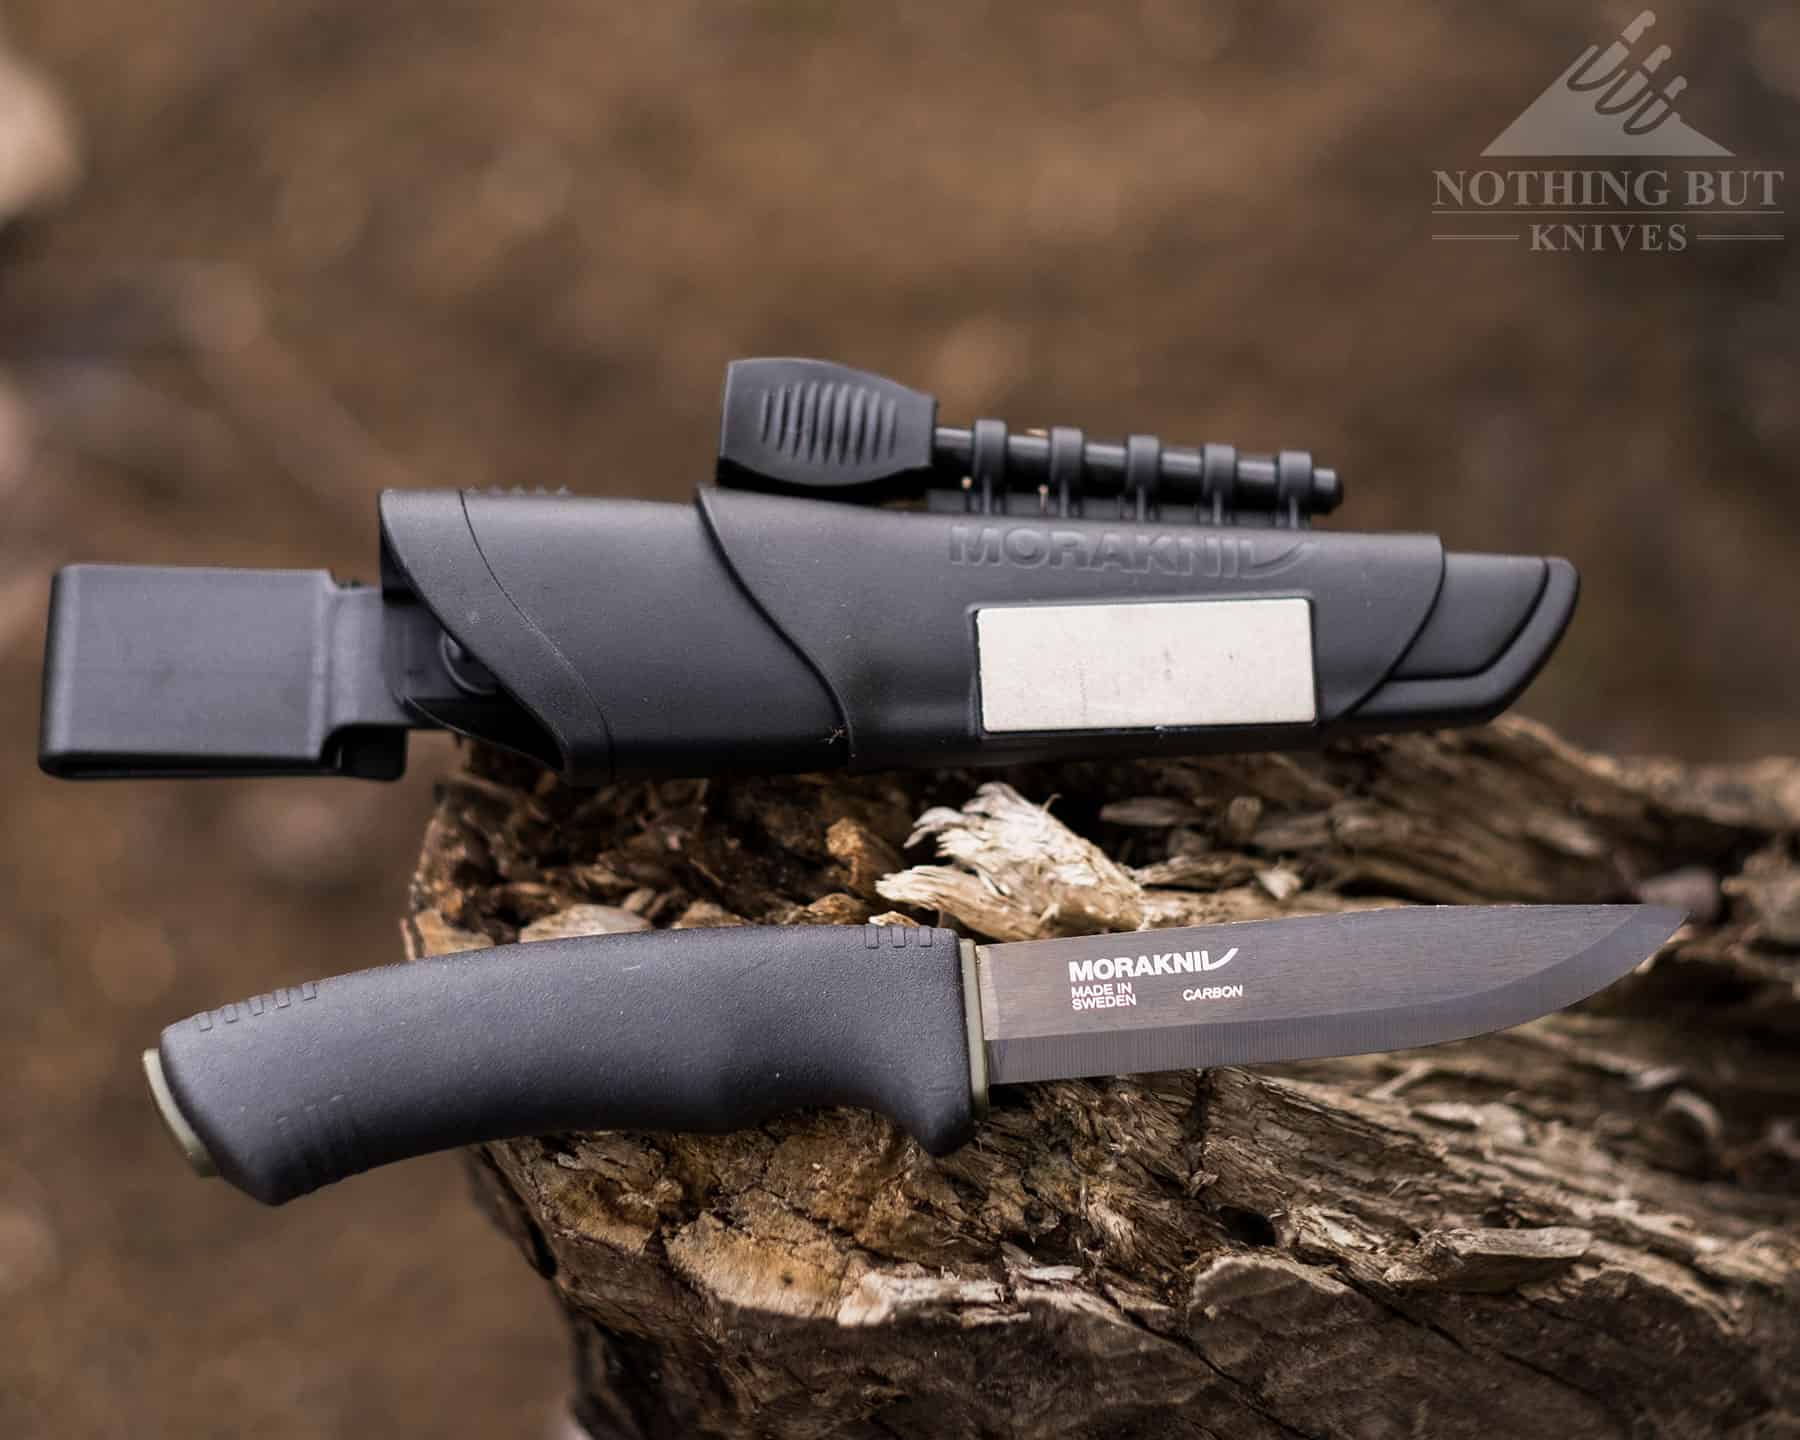 The Mora Black is technically a bushcraft knife, but it checks a lot of the boxes required for a good tactical knife.